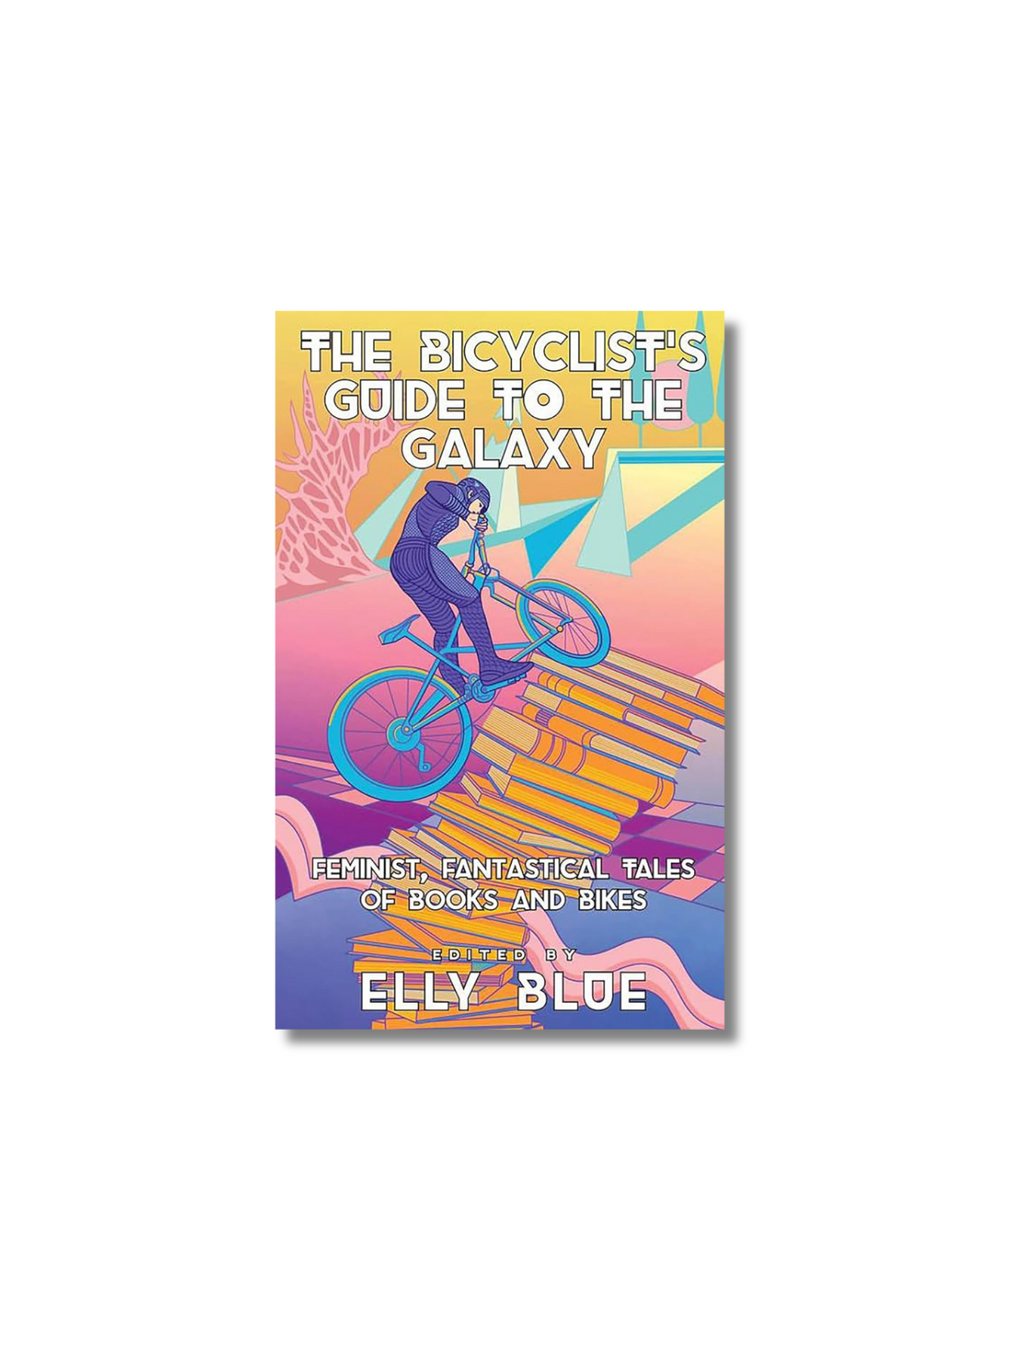 The Bicyclist's Guide to the Galaxy